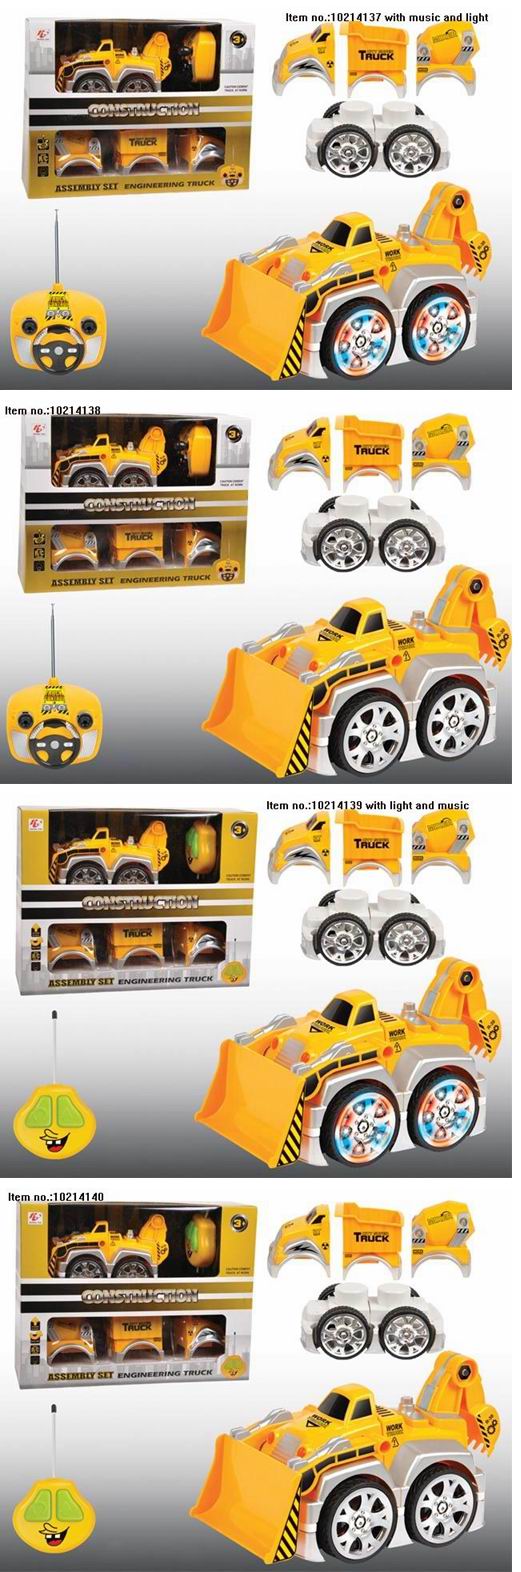 4 Channel Construction Toys of Truck with Light for Kids